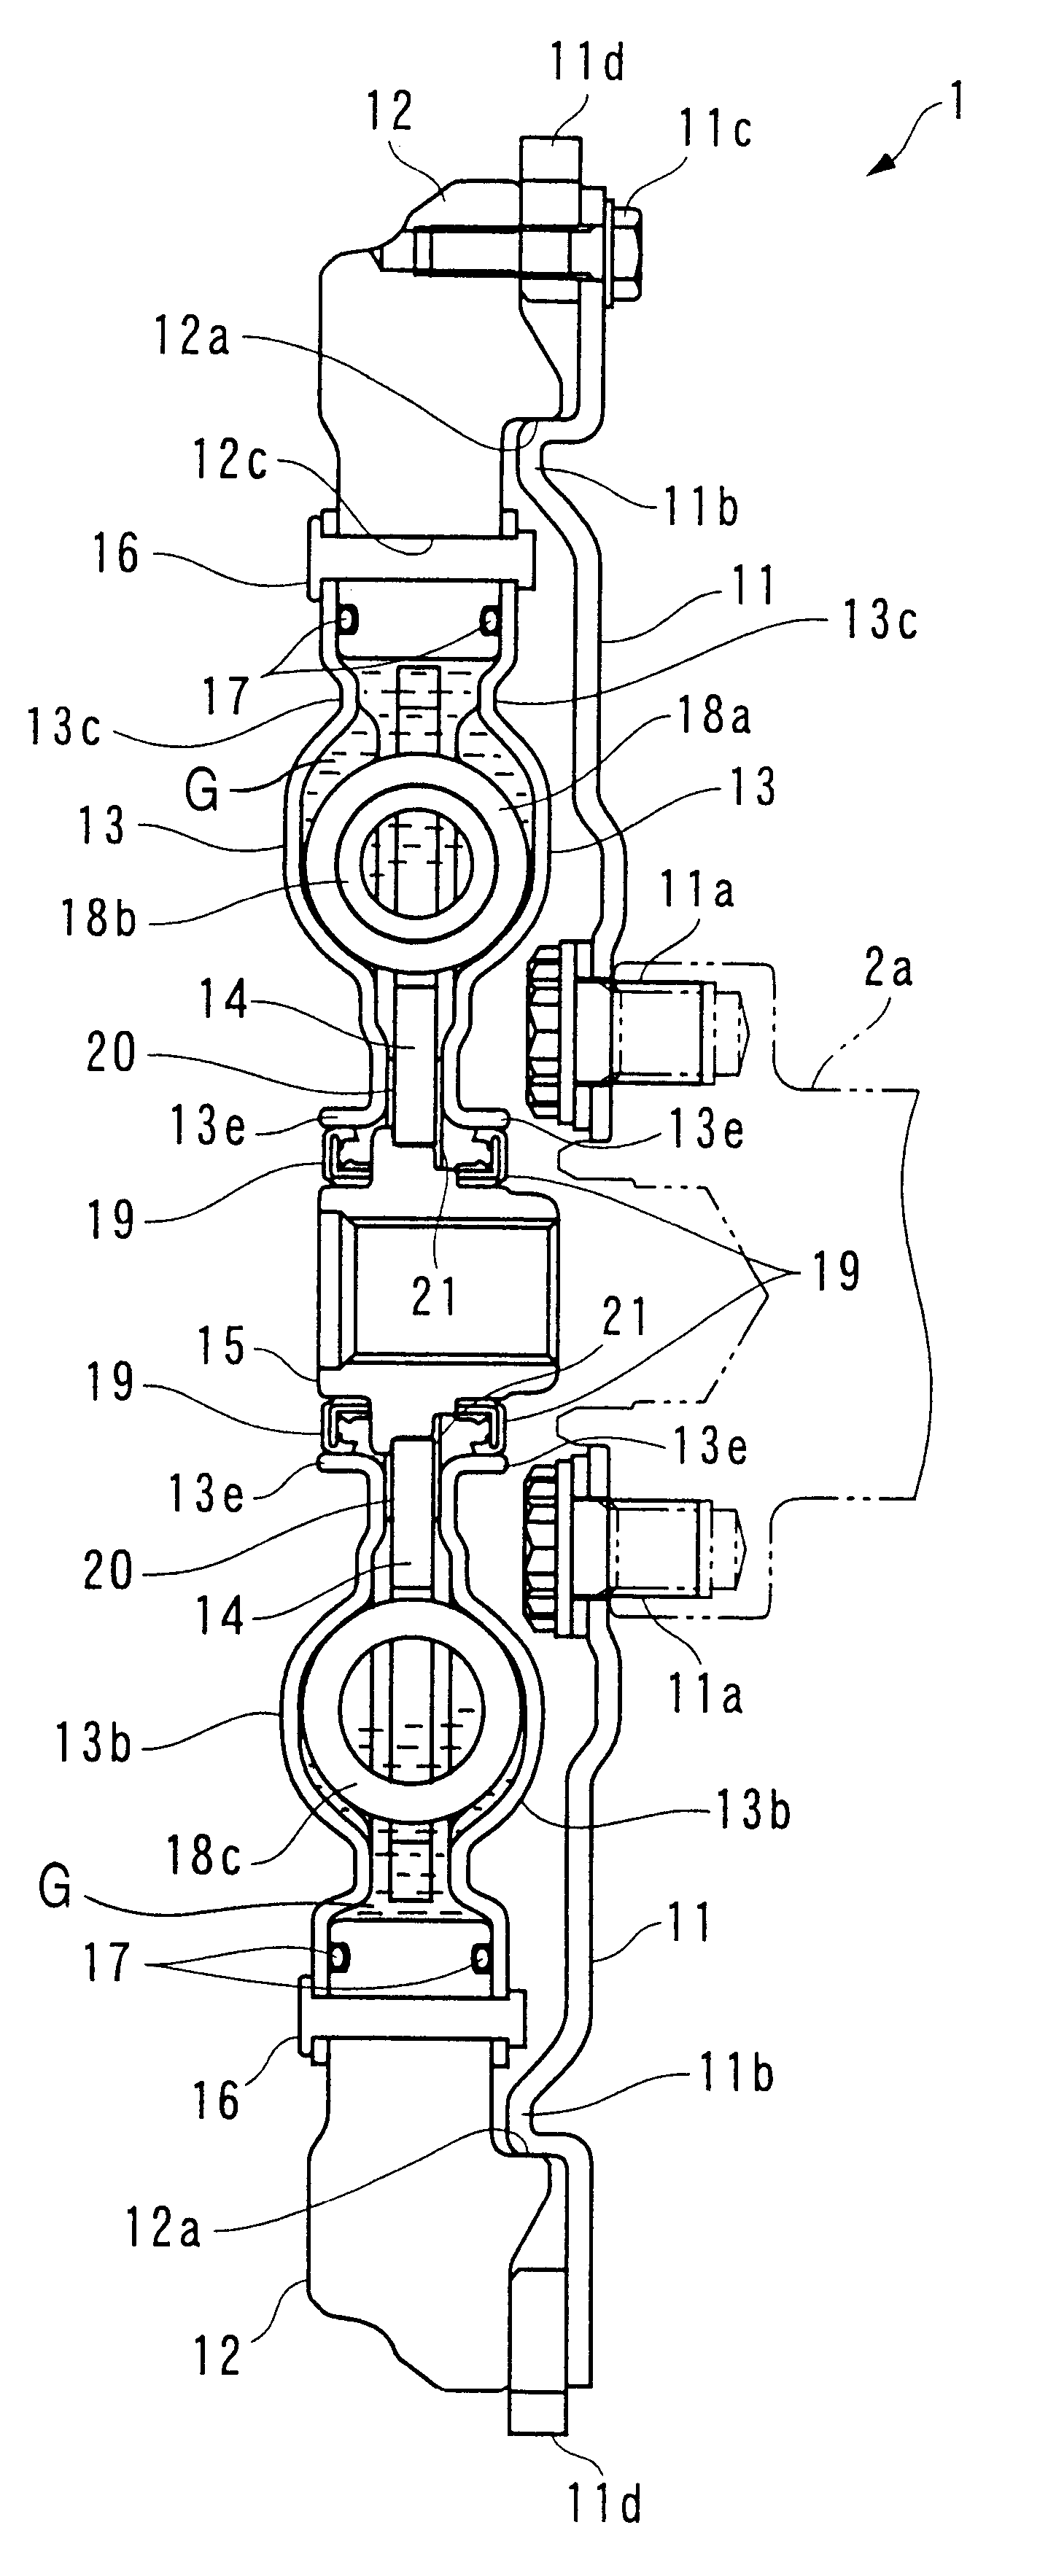 Flywheel device for prime mover